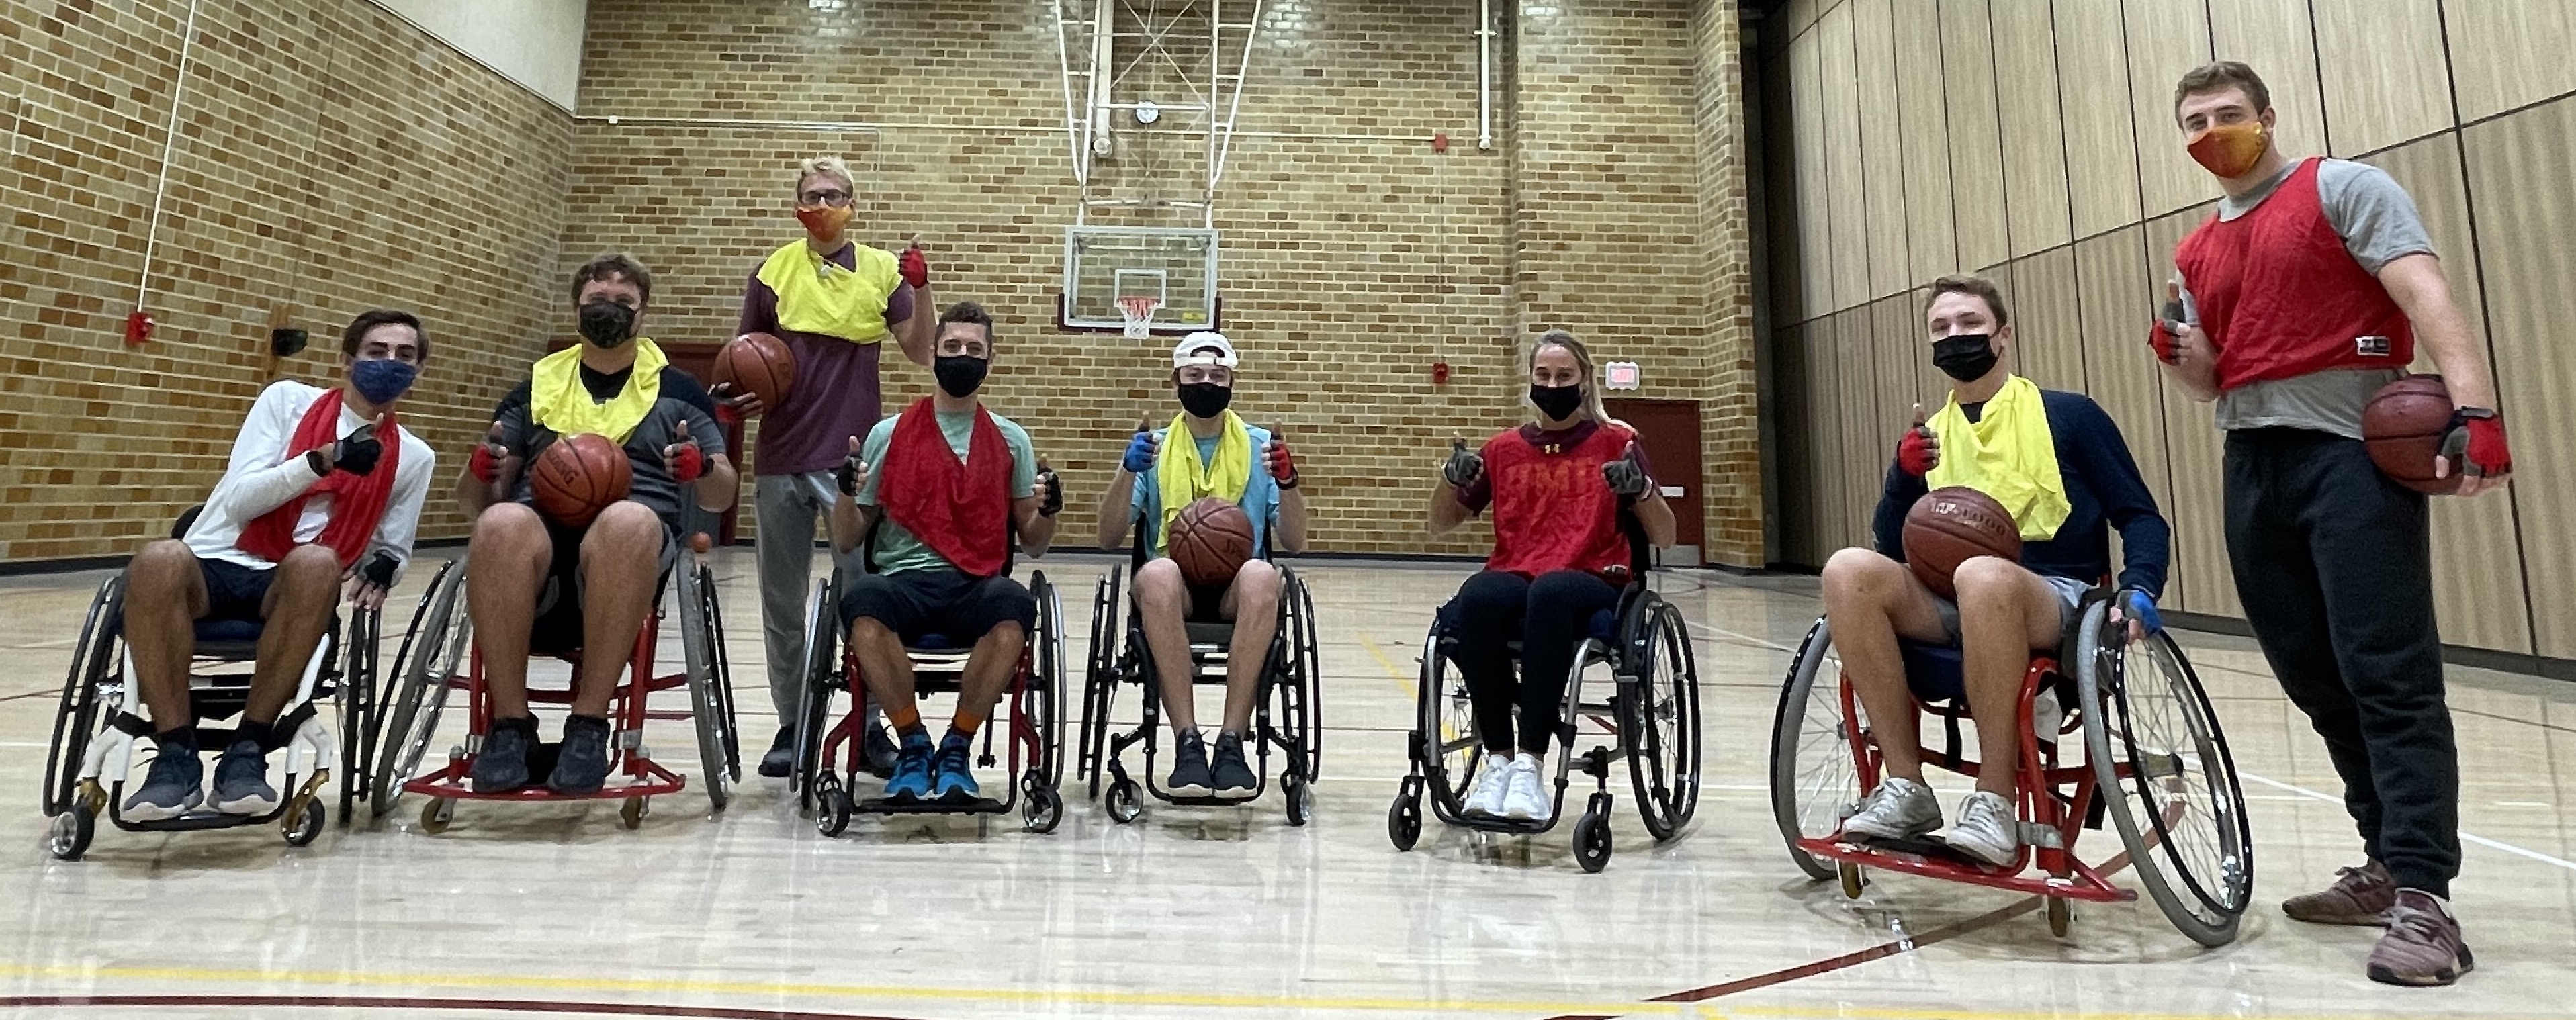 several people in wheelchairs playing basketball, facing the camera and giving a thumbs up